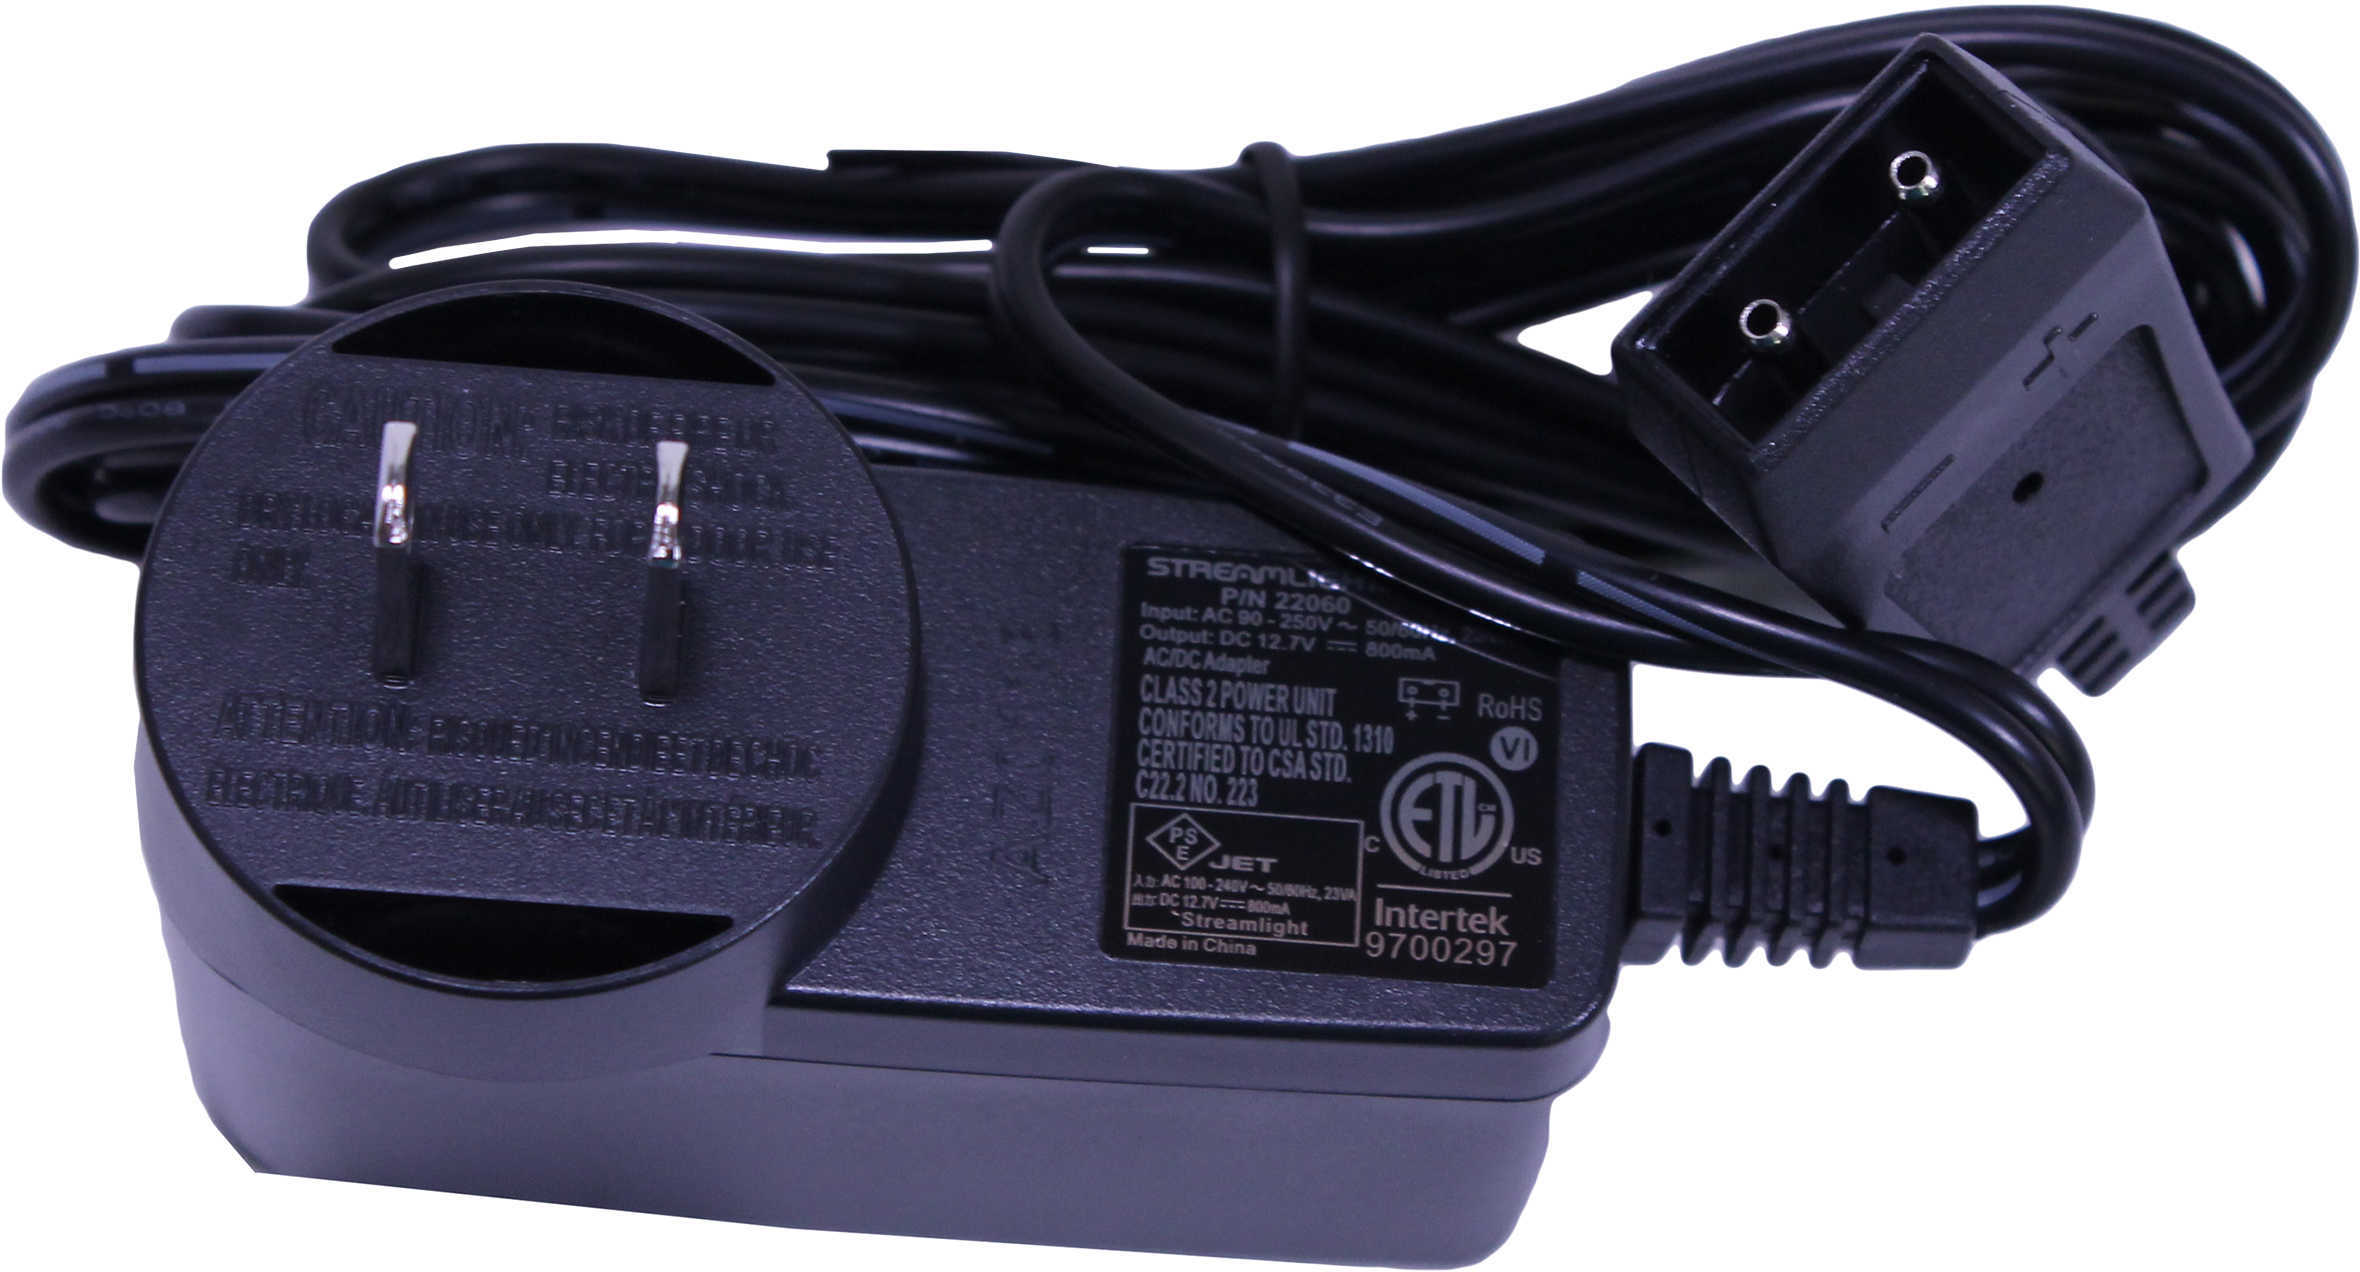 Streamlight Type A AC Charge Cord